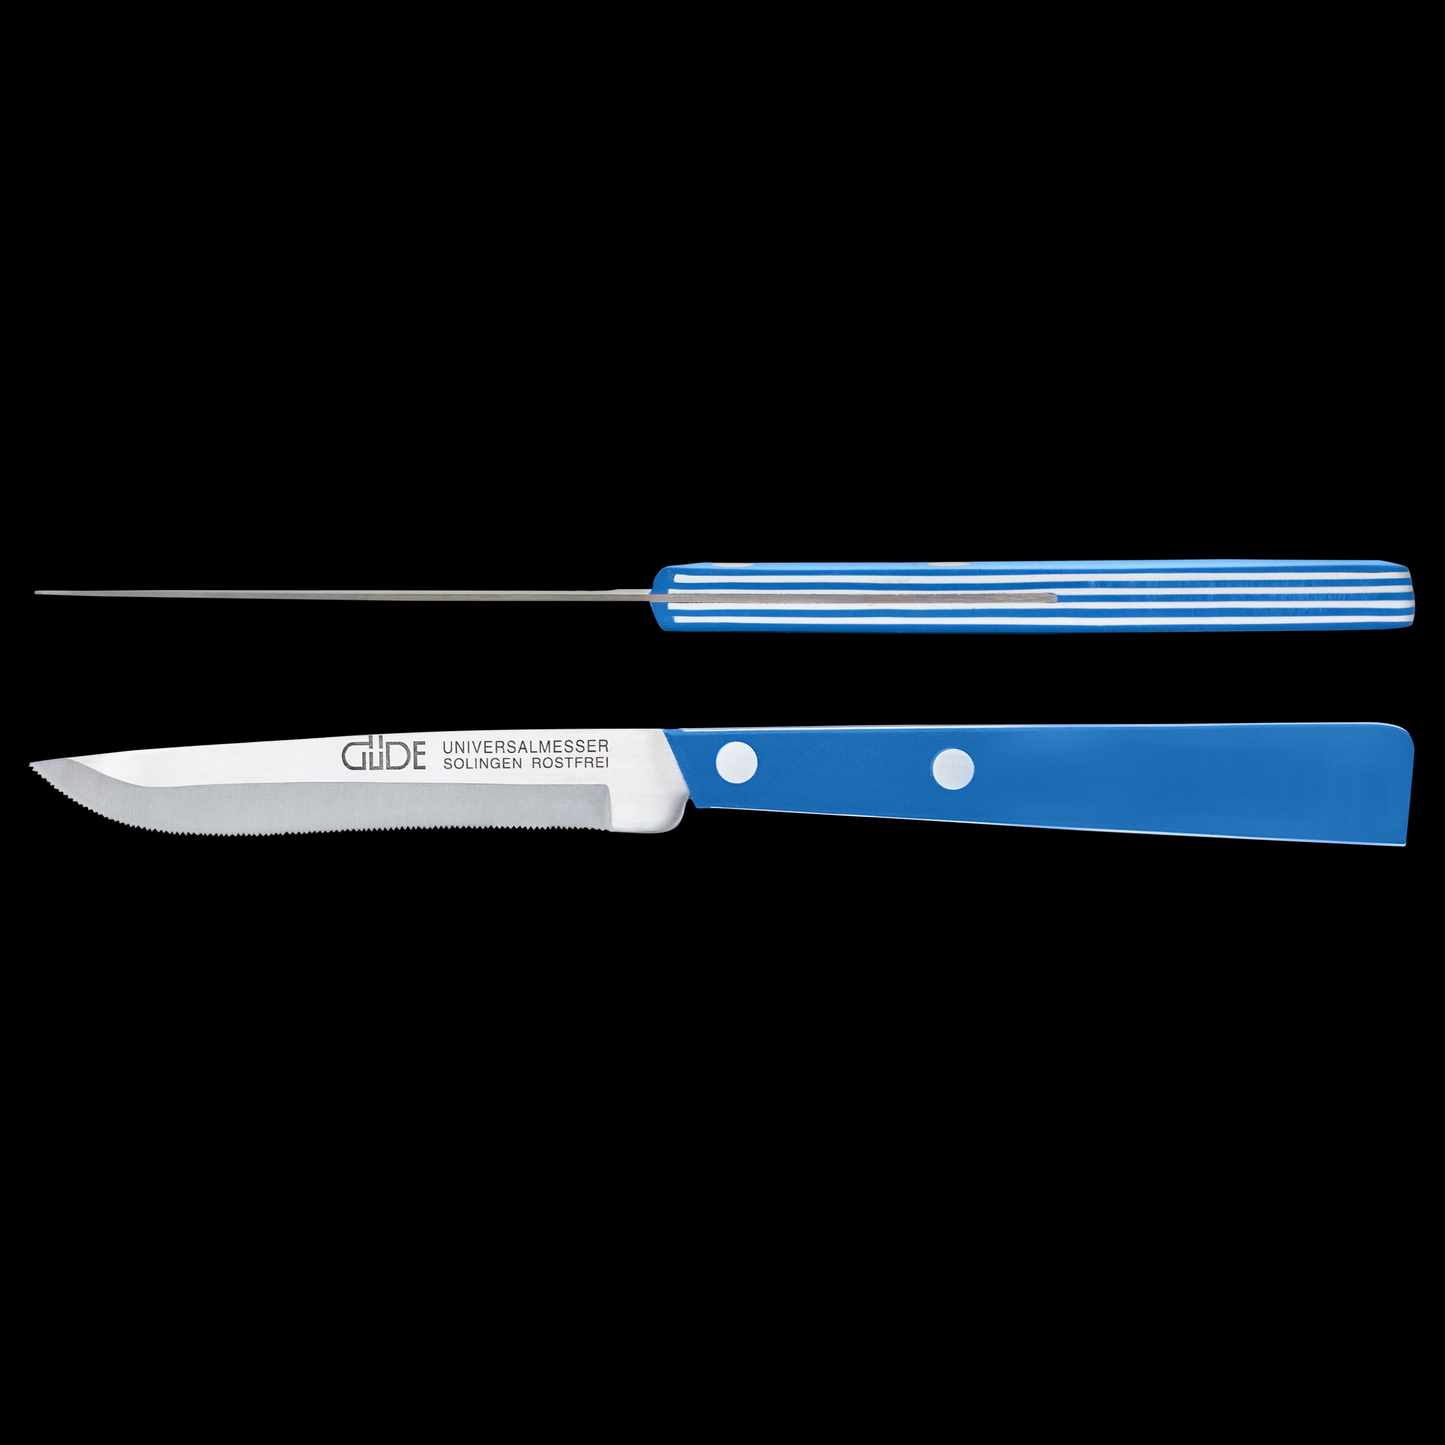 Gude Universal Knife Series 4", White / Blue Hostaform Handle and Serrated Blade - GuedeUSA